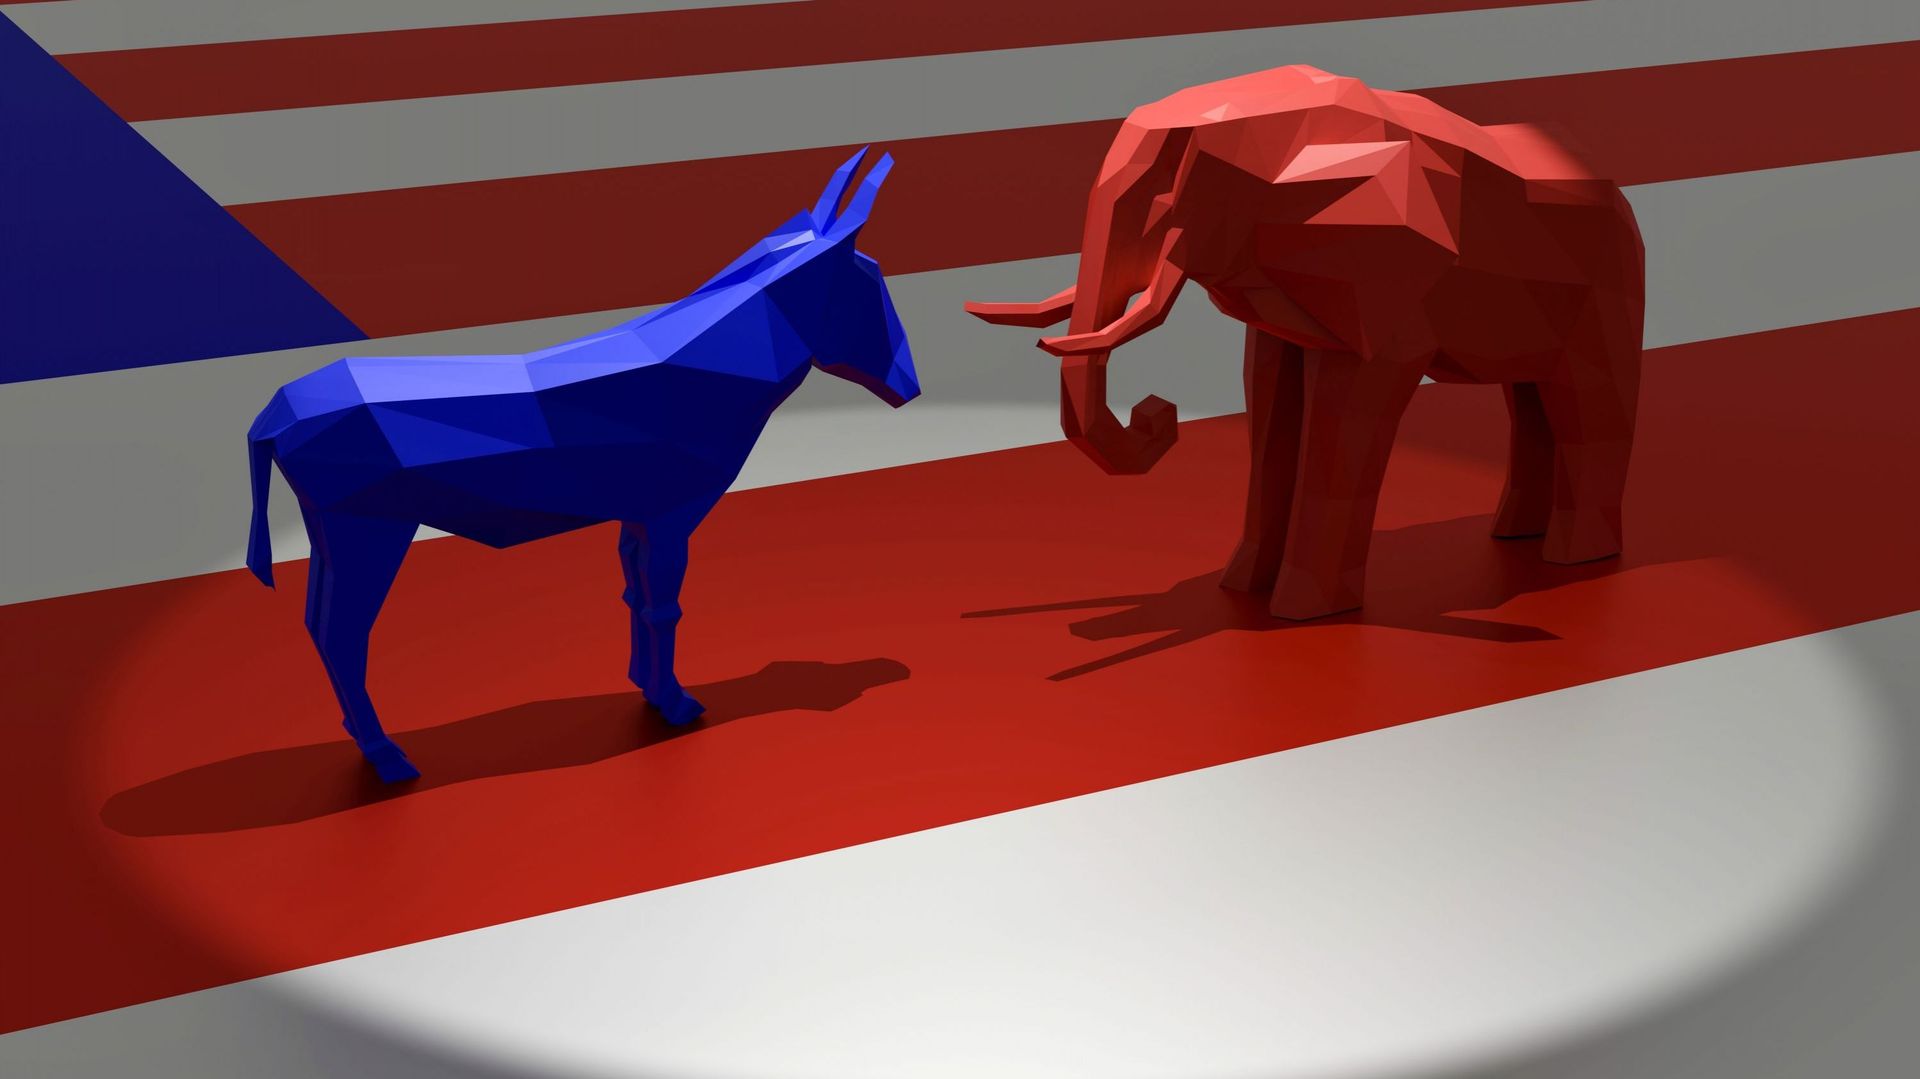 Democratic Blue Donkey and Republican Red Elephant in Spotlight on Top of American Flag